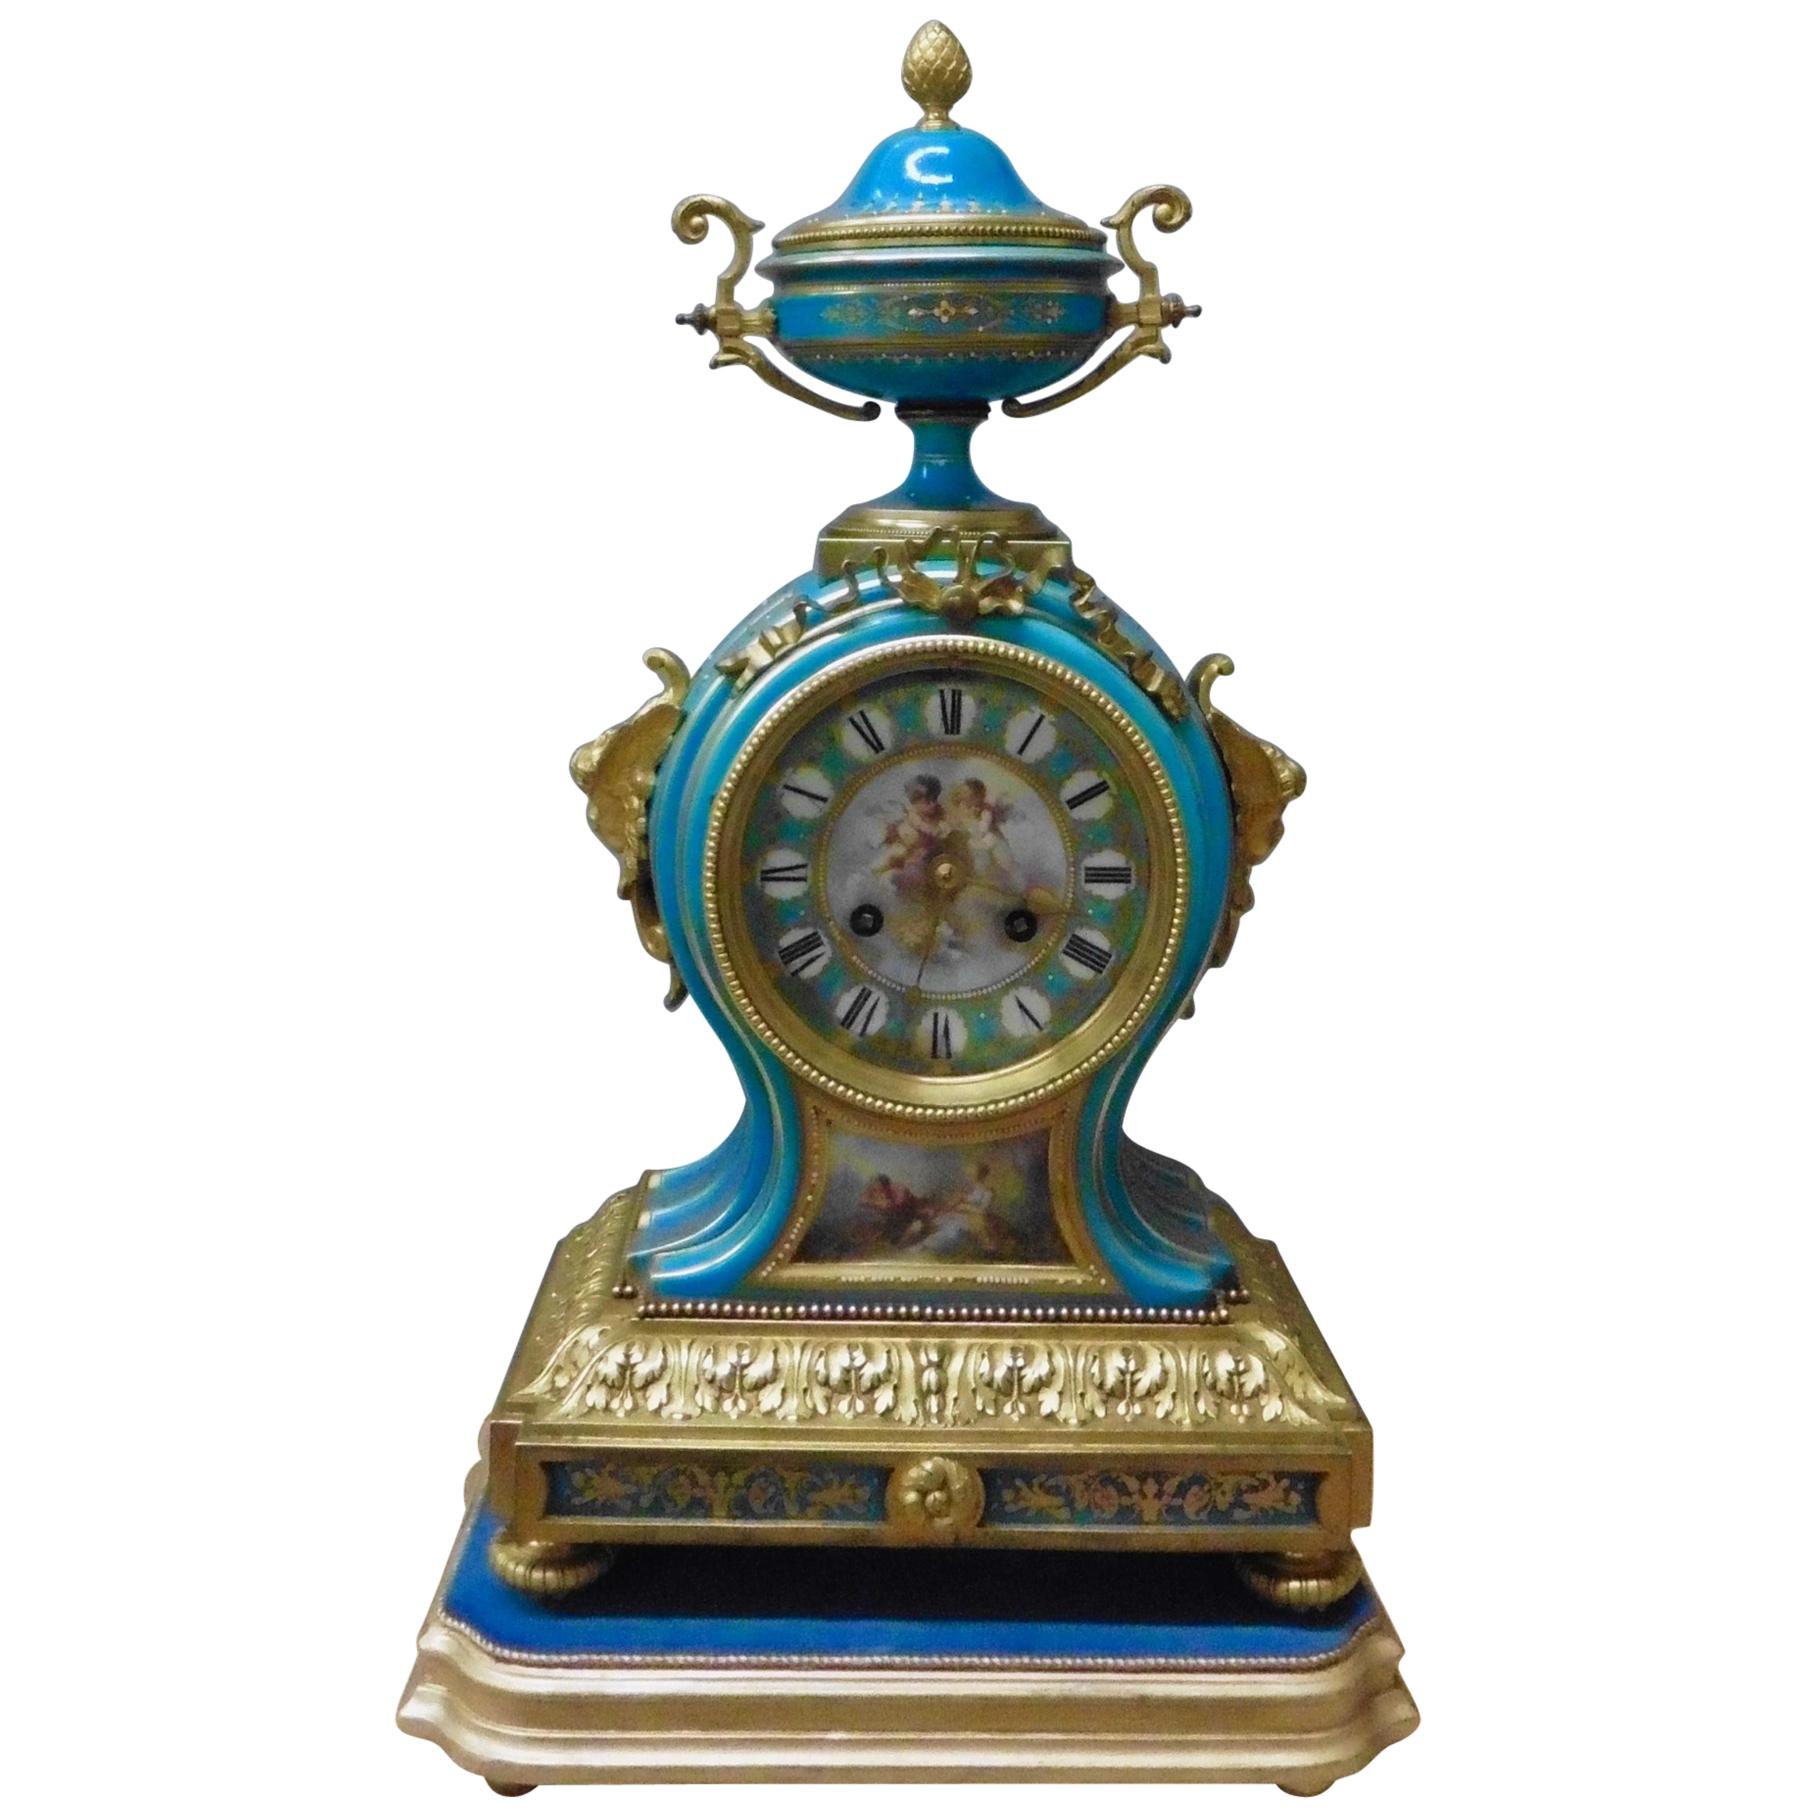 French Porcelain and Ormolu Mantel Clock